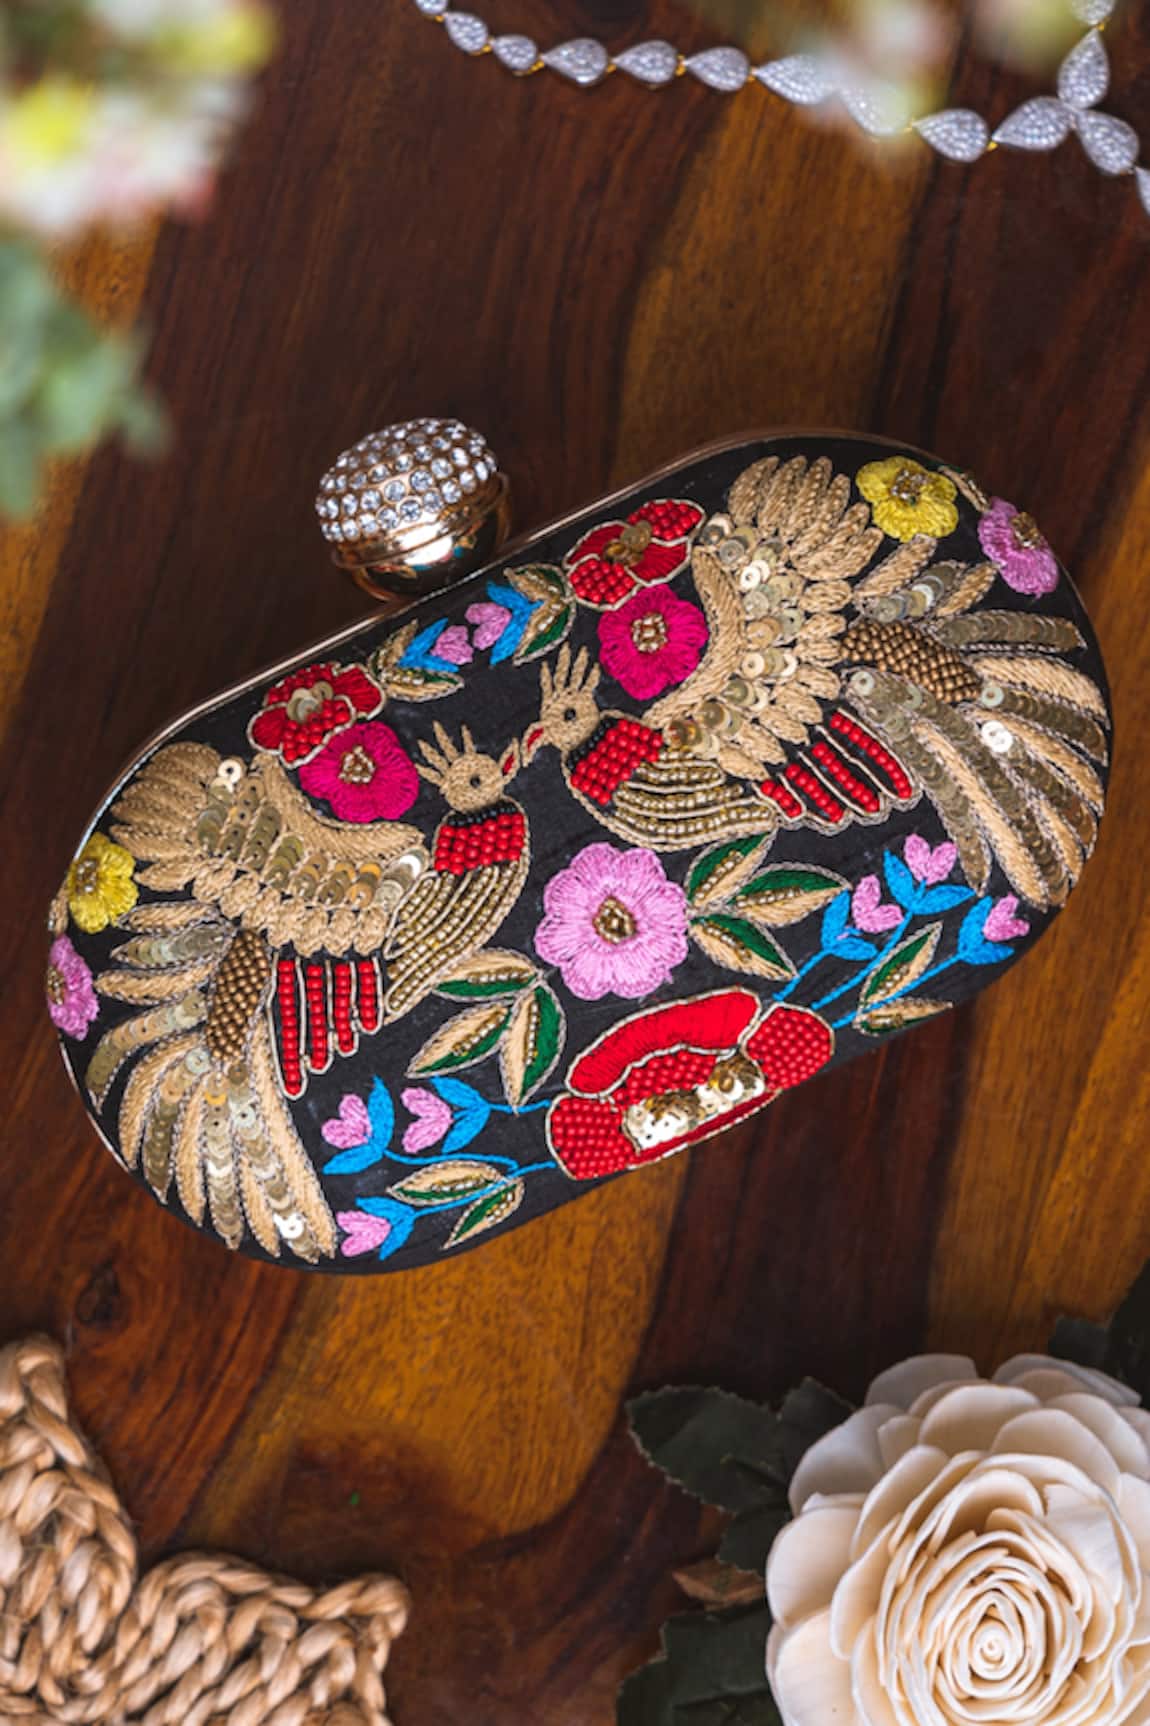 NR BY NIDHI RATHI Phoenix Embroidered Oval Clutch 